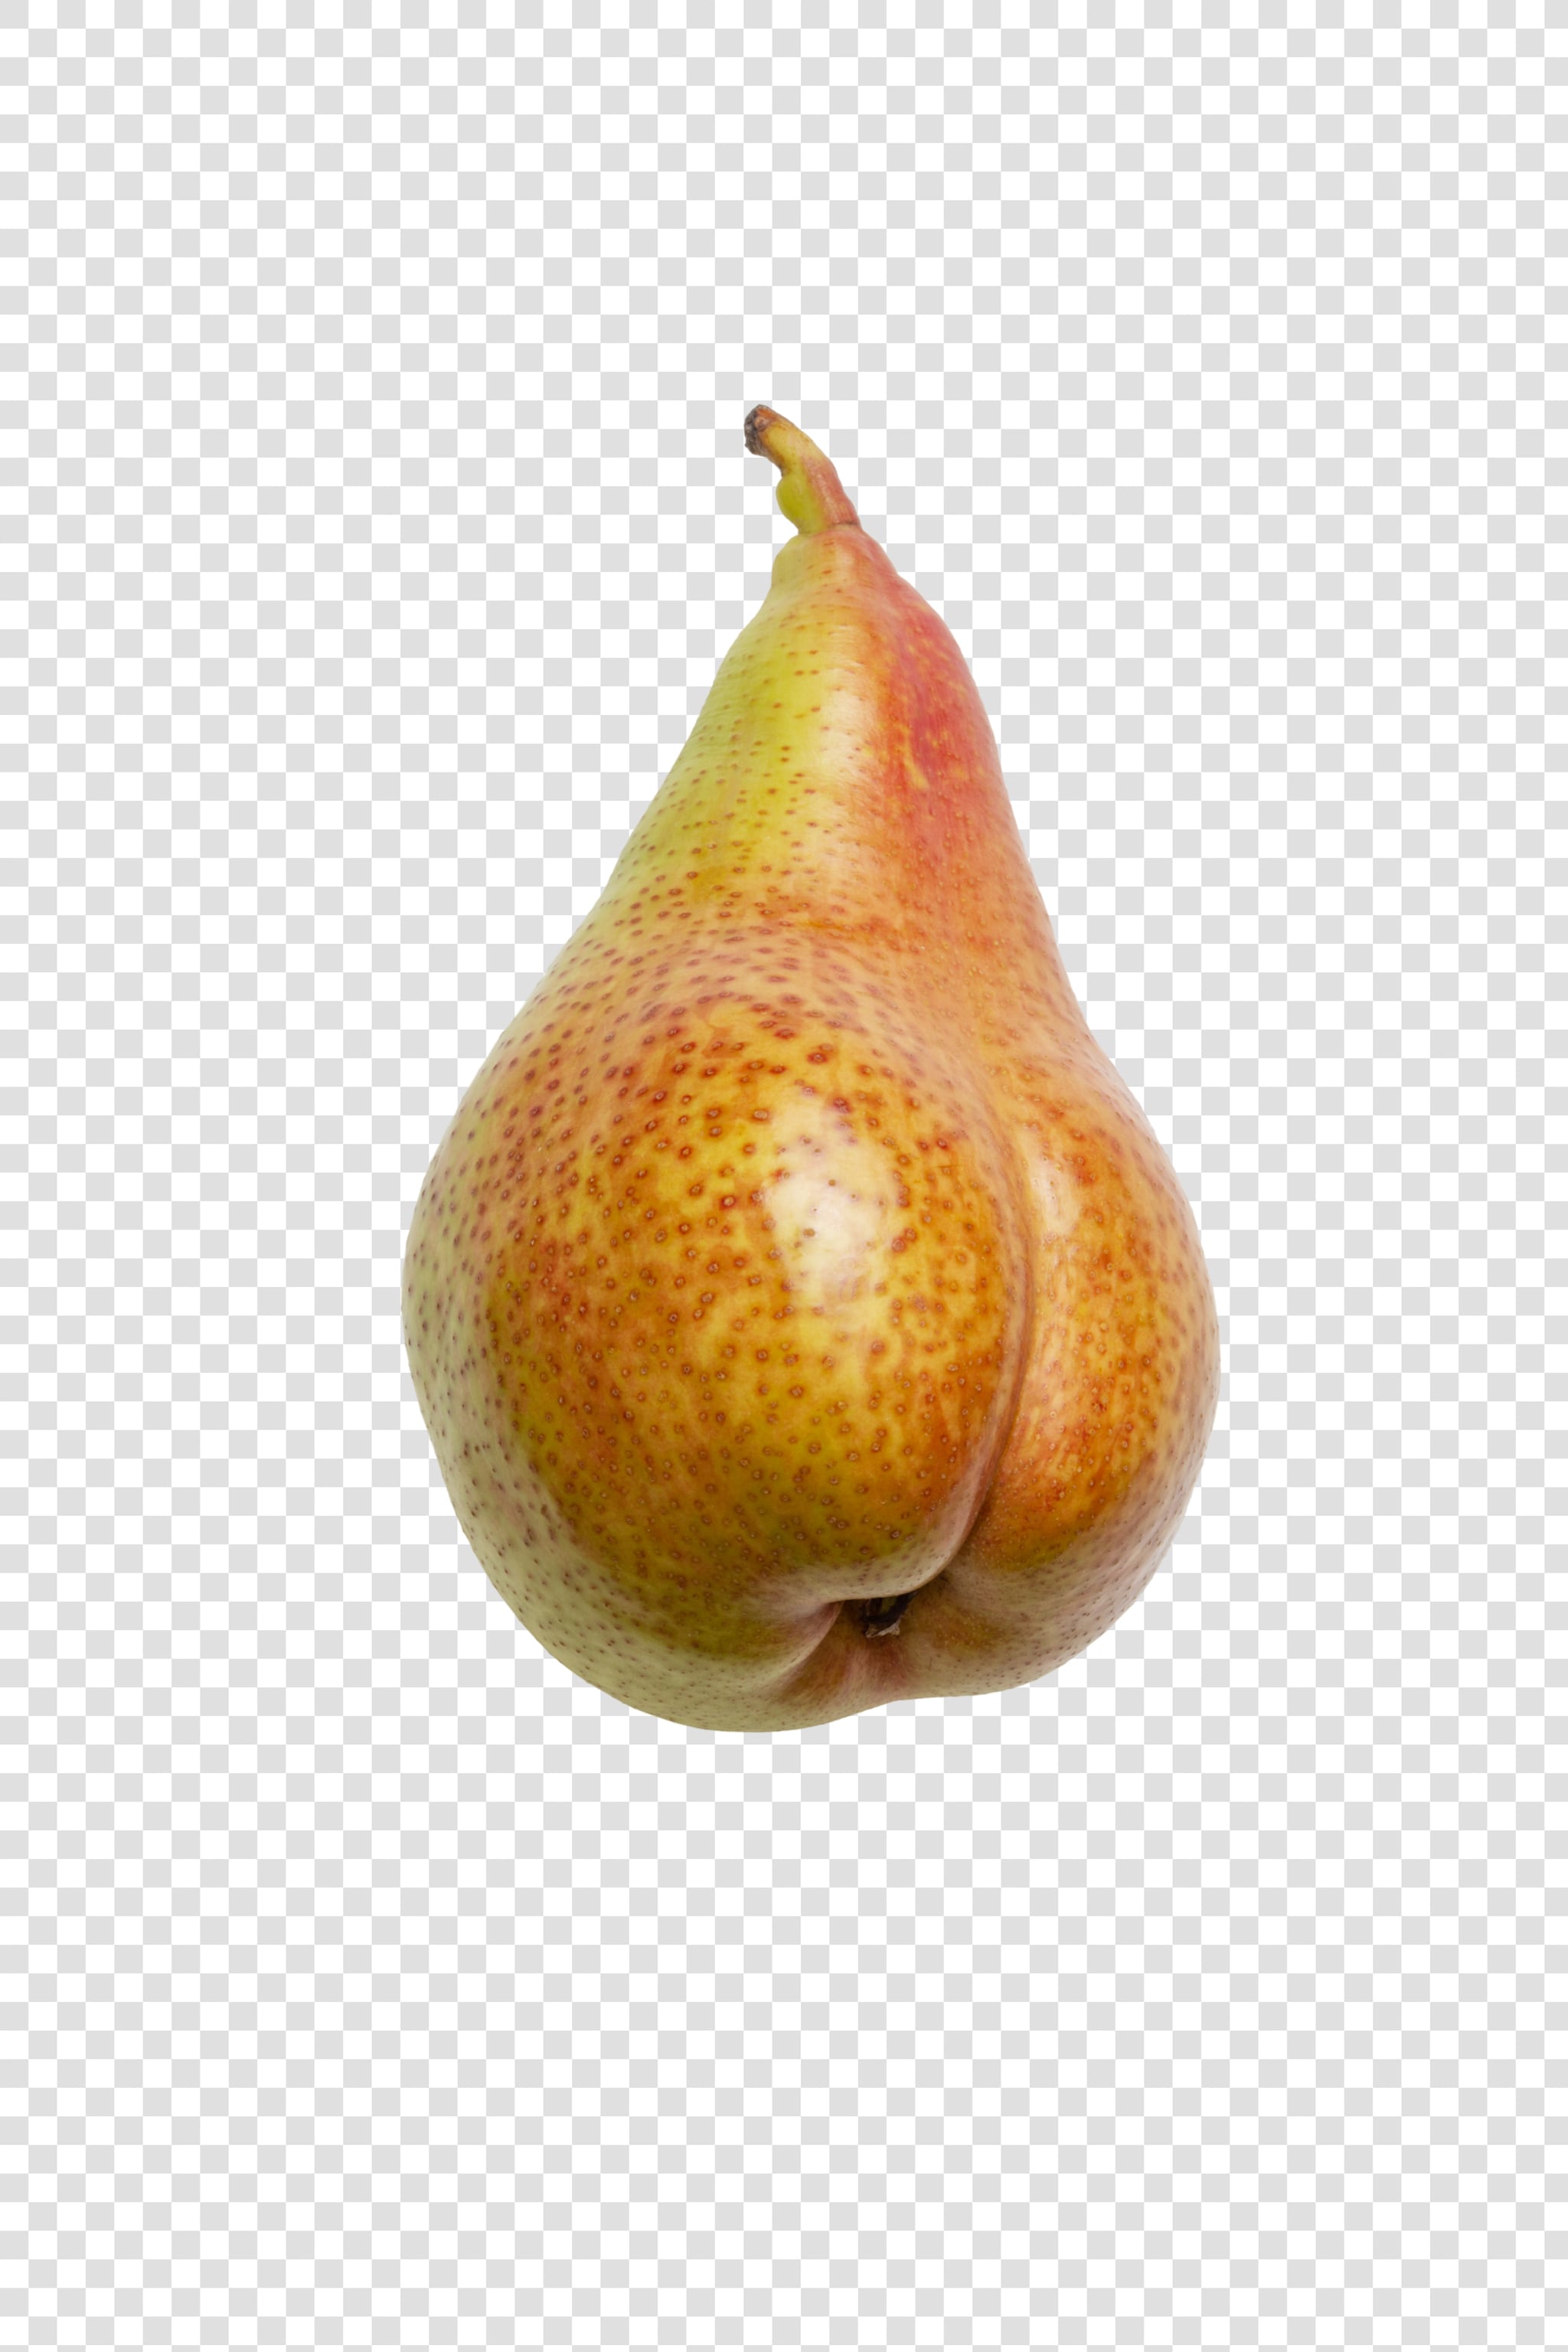 Clean Isolated PSD image of Pear on transparent background with separated shadow